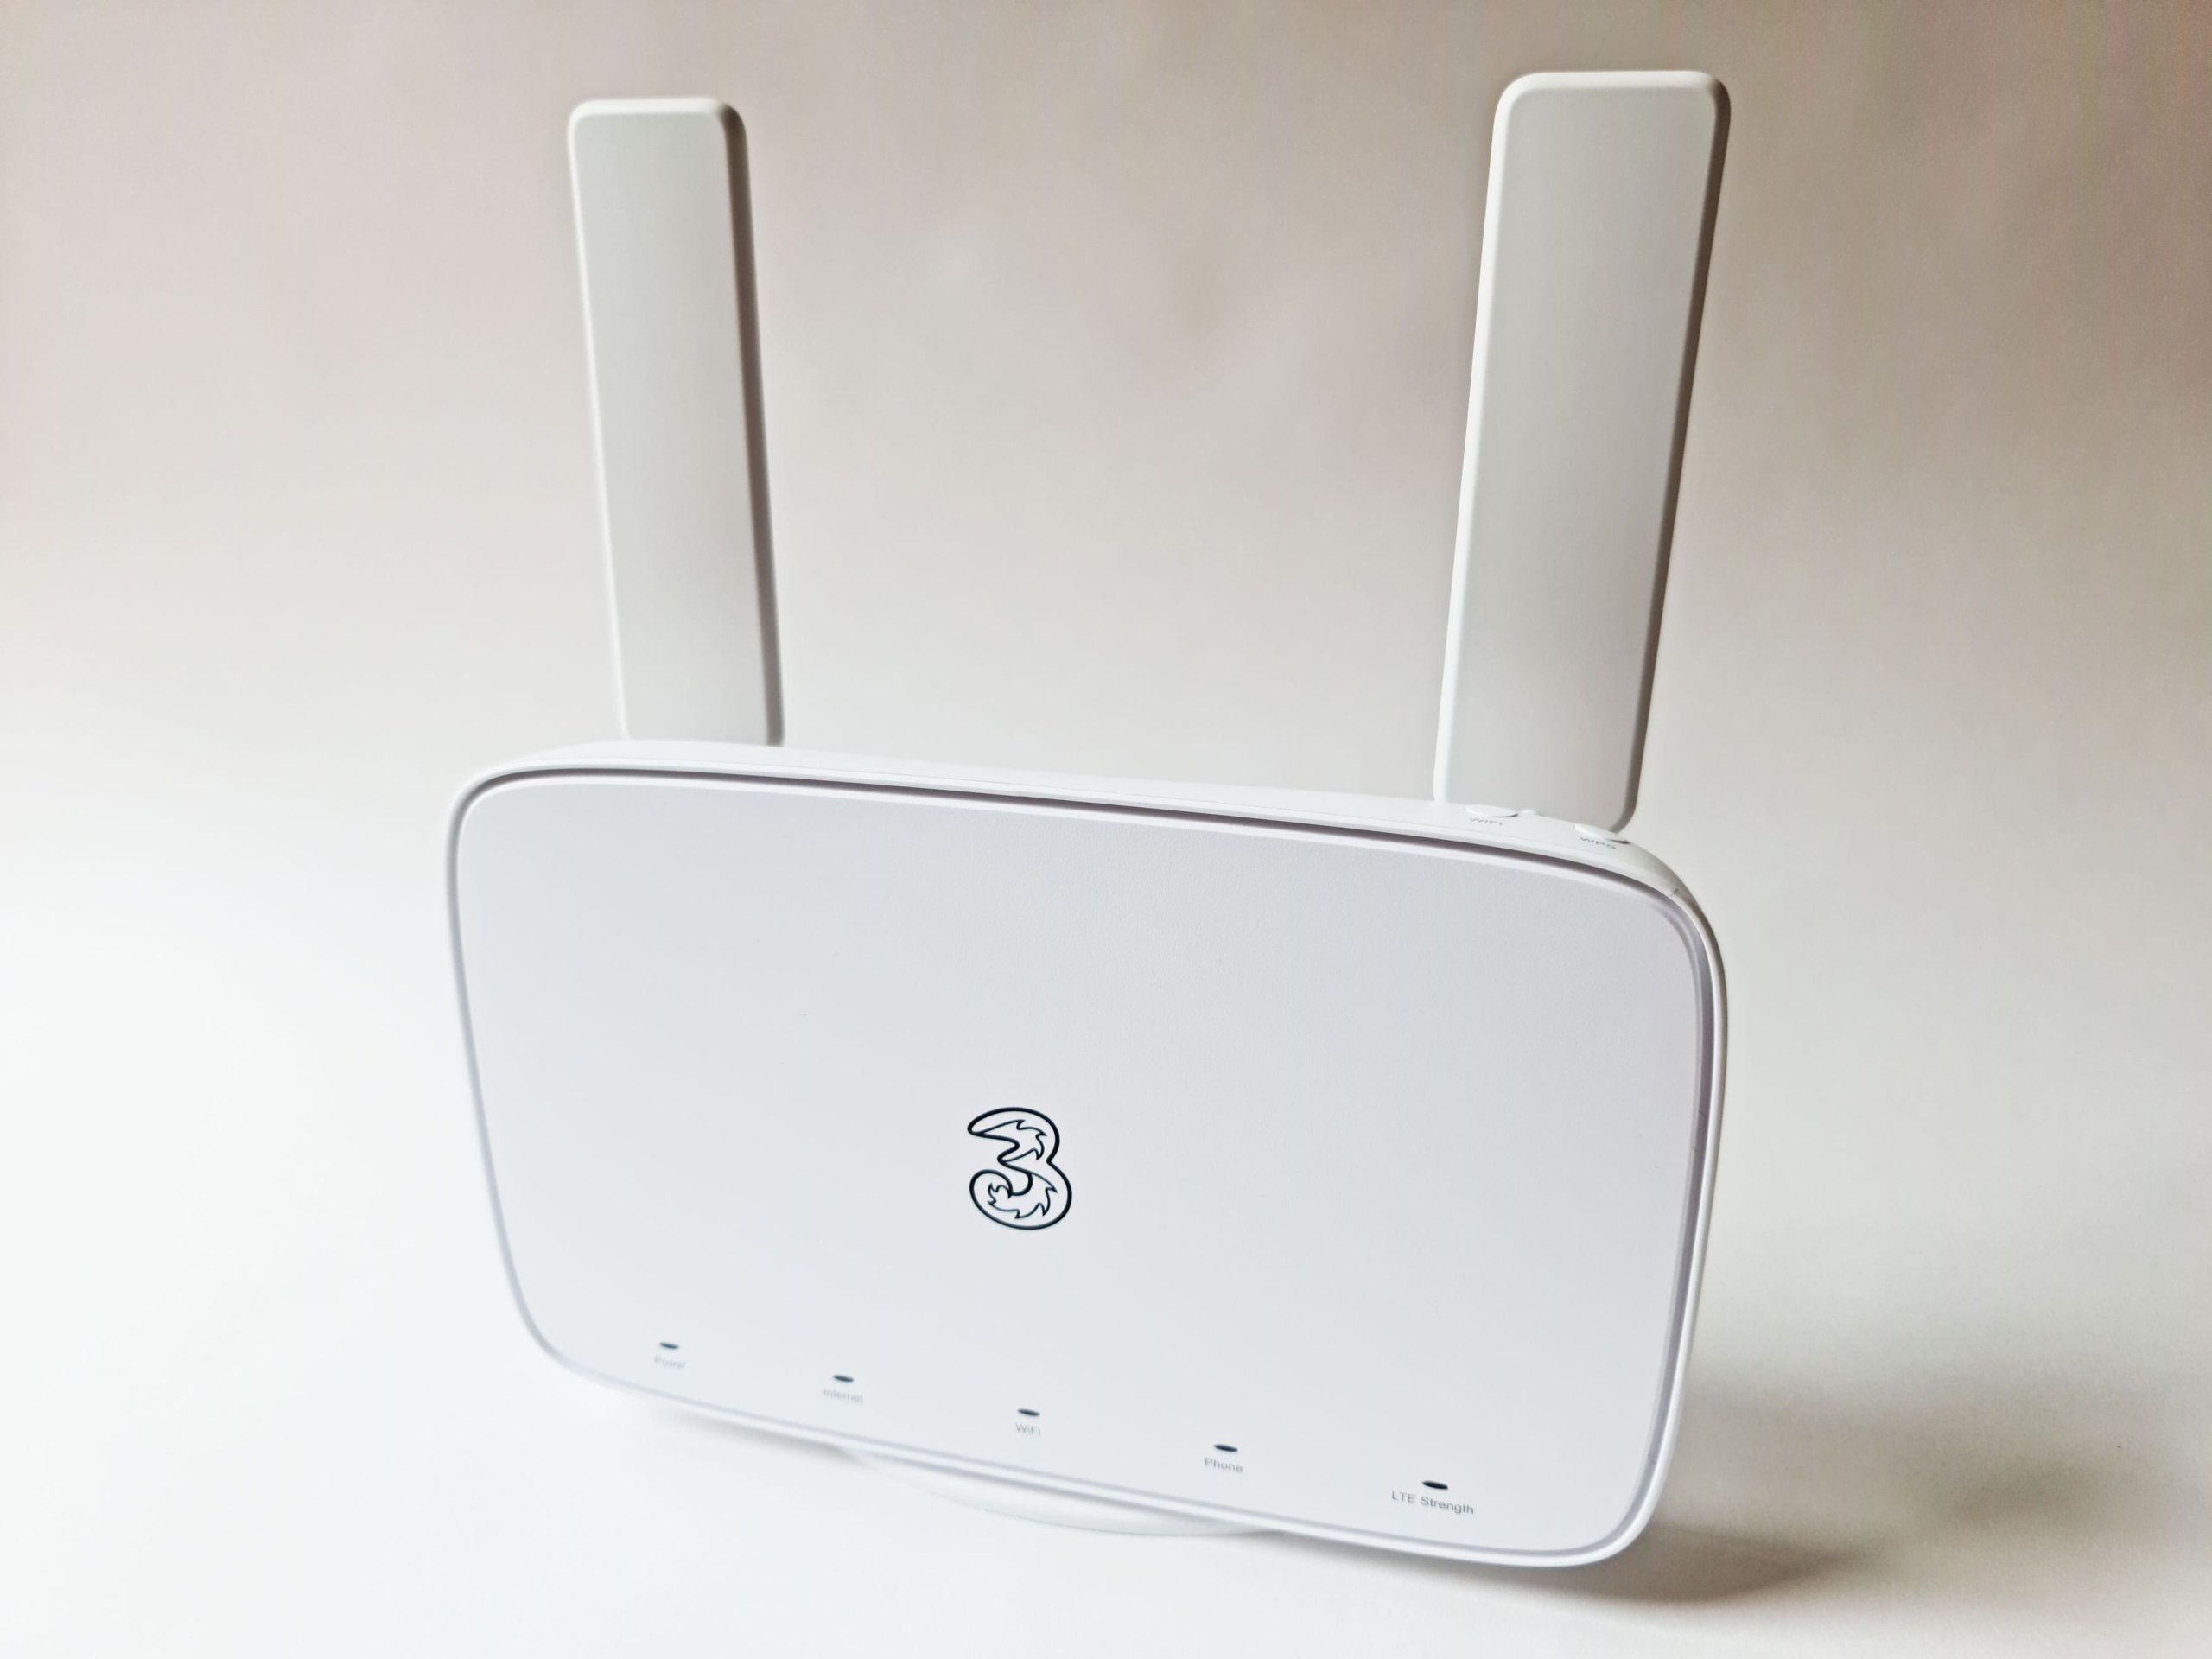 4G router with antennas installed.